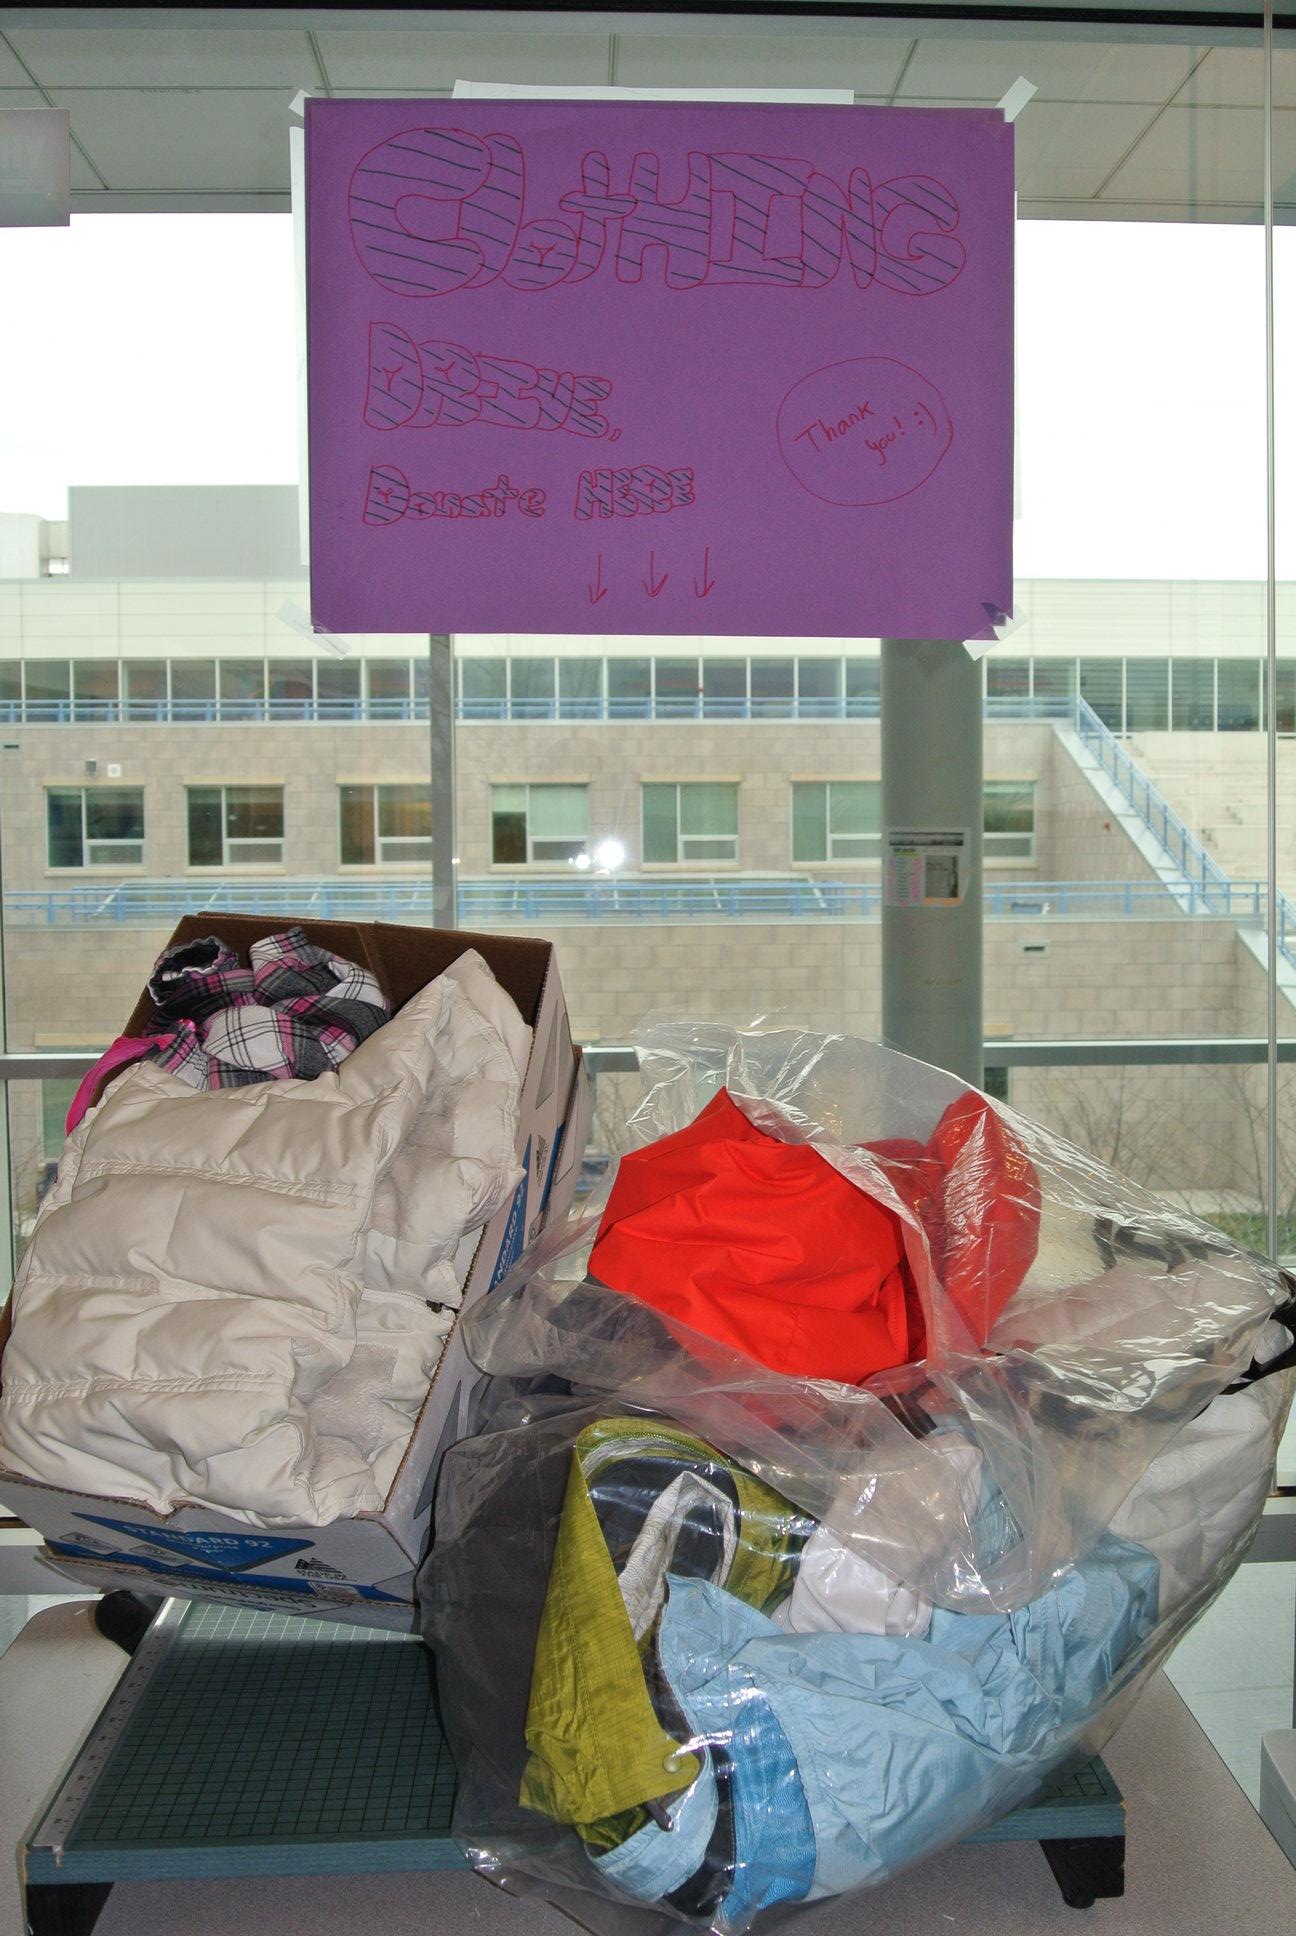 Clubs around the school are helping charities by doing clothing drives and bake sales